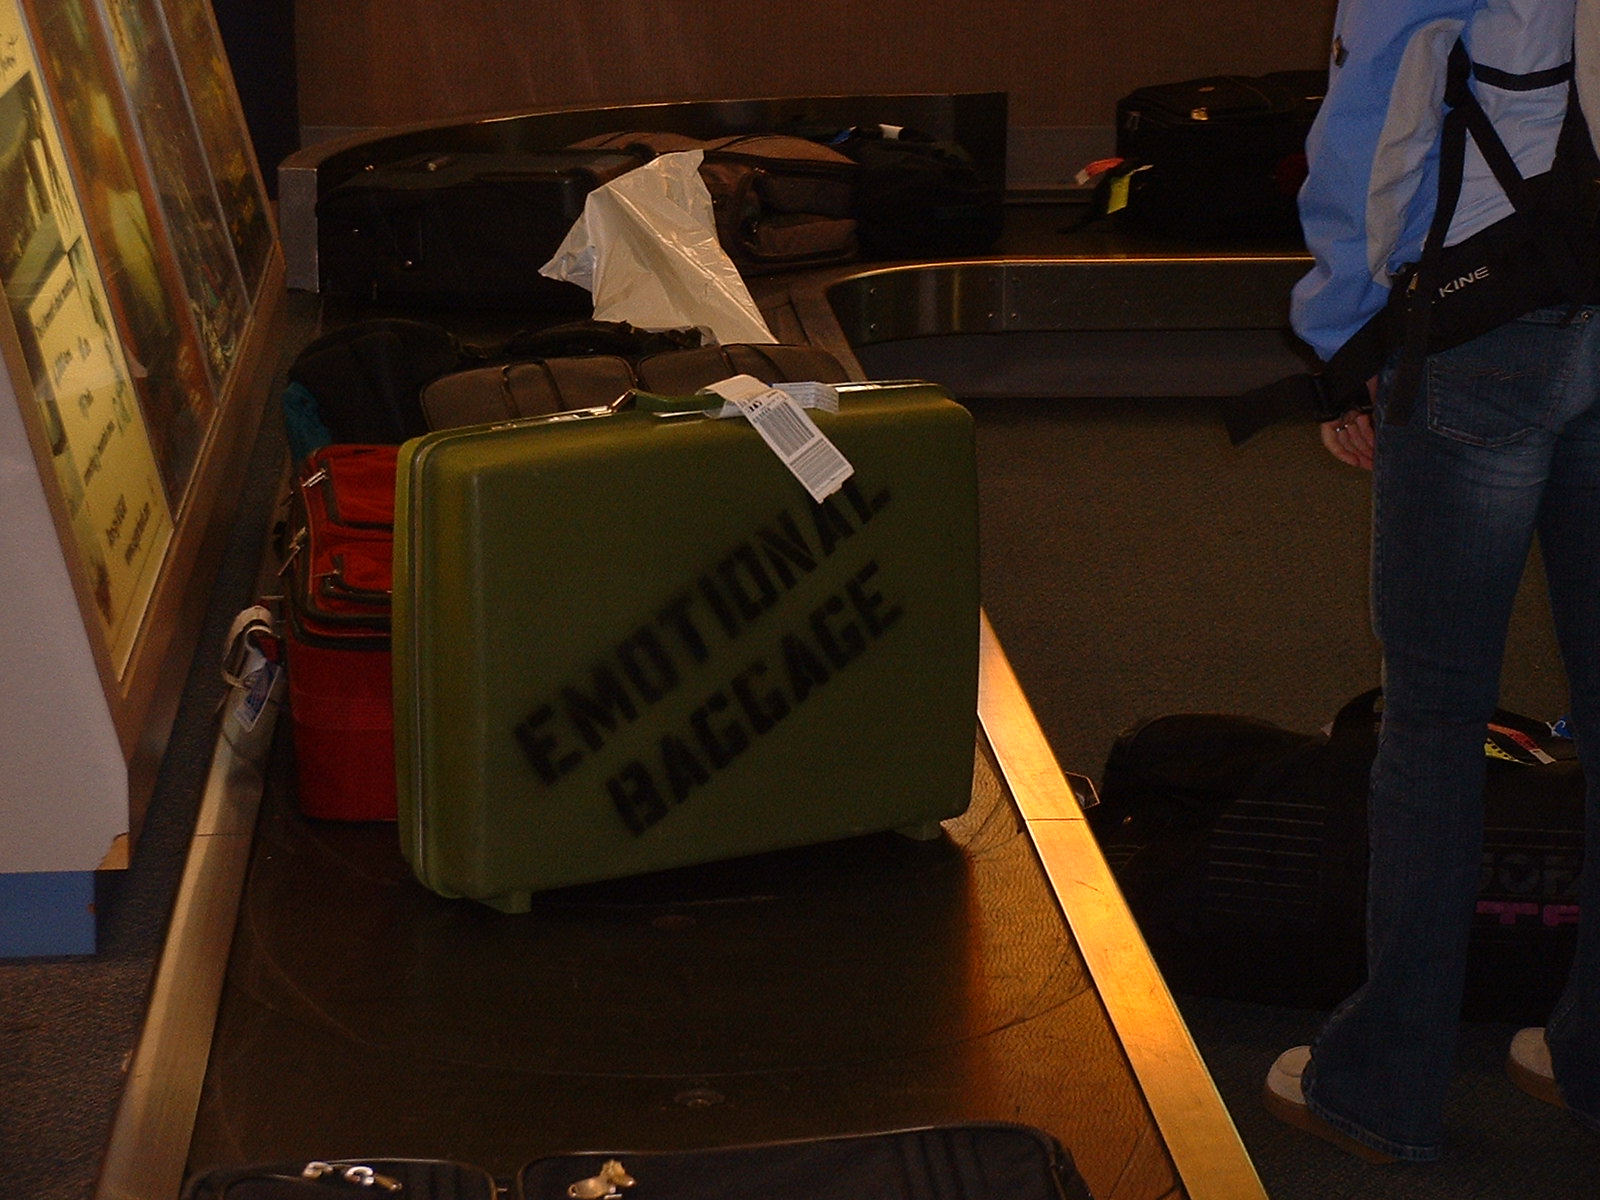 Image: Retro green suitcase with 'Emotional Baggage' stenciled on side on conveyor belt.